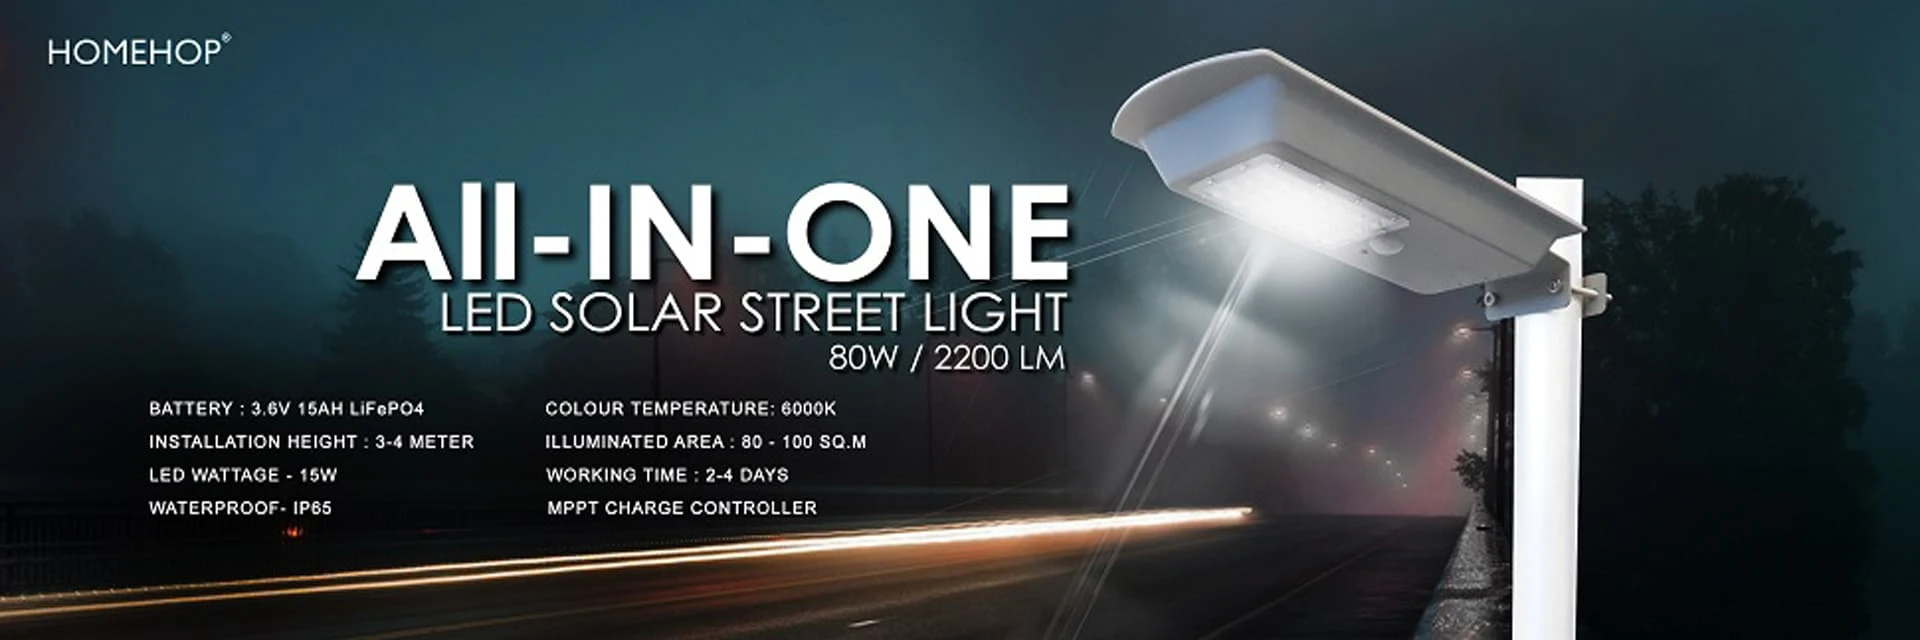 all in one integrated solar street light, outdoor